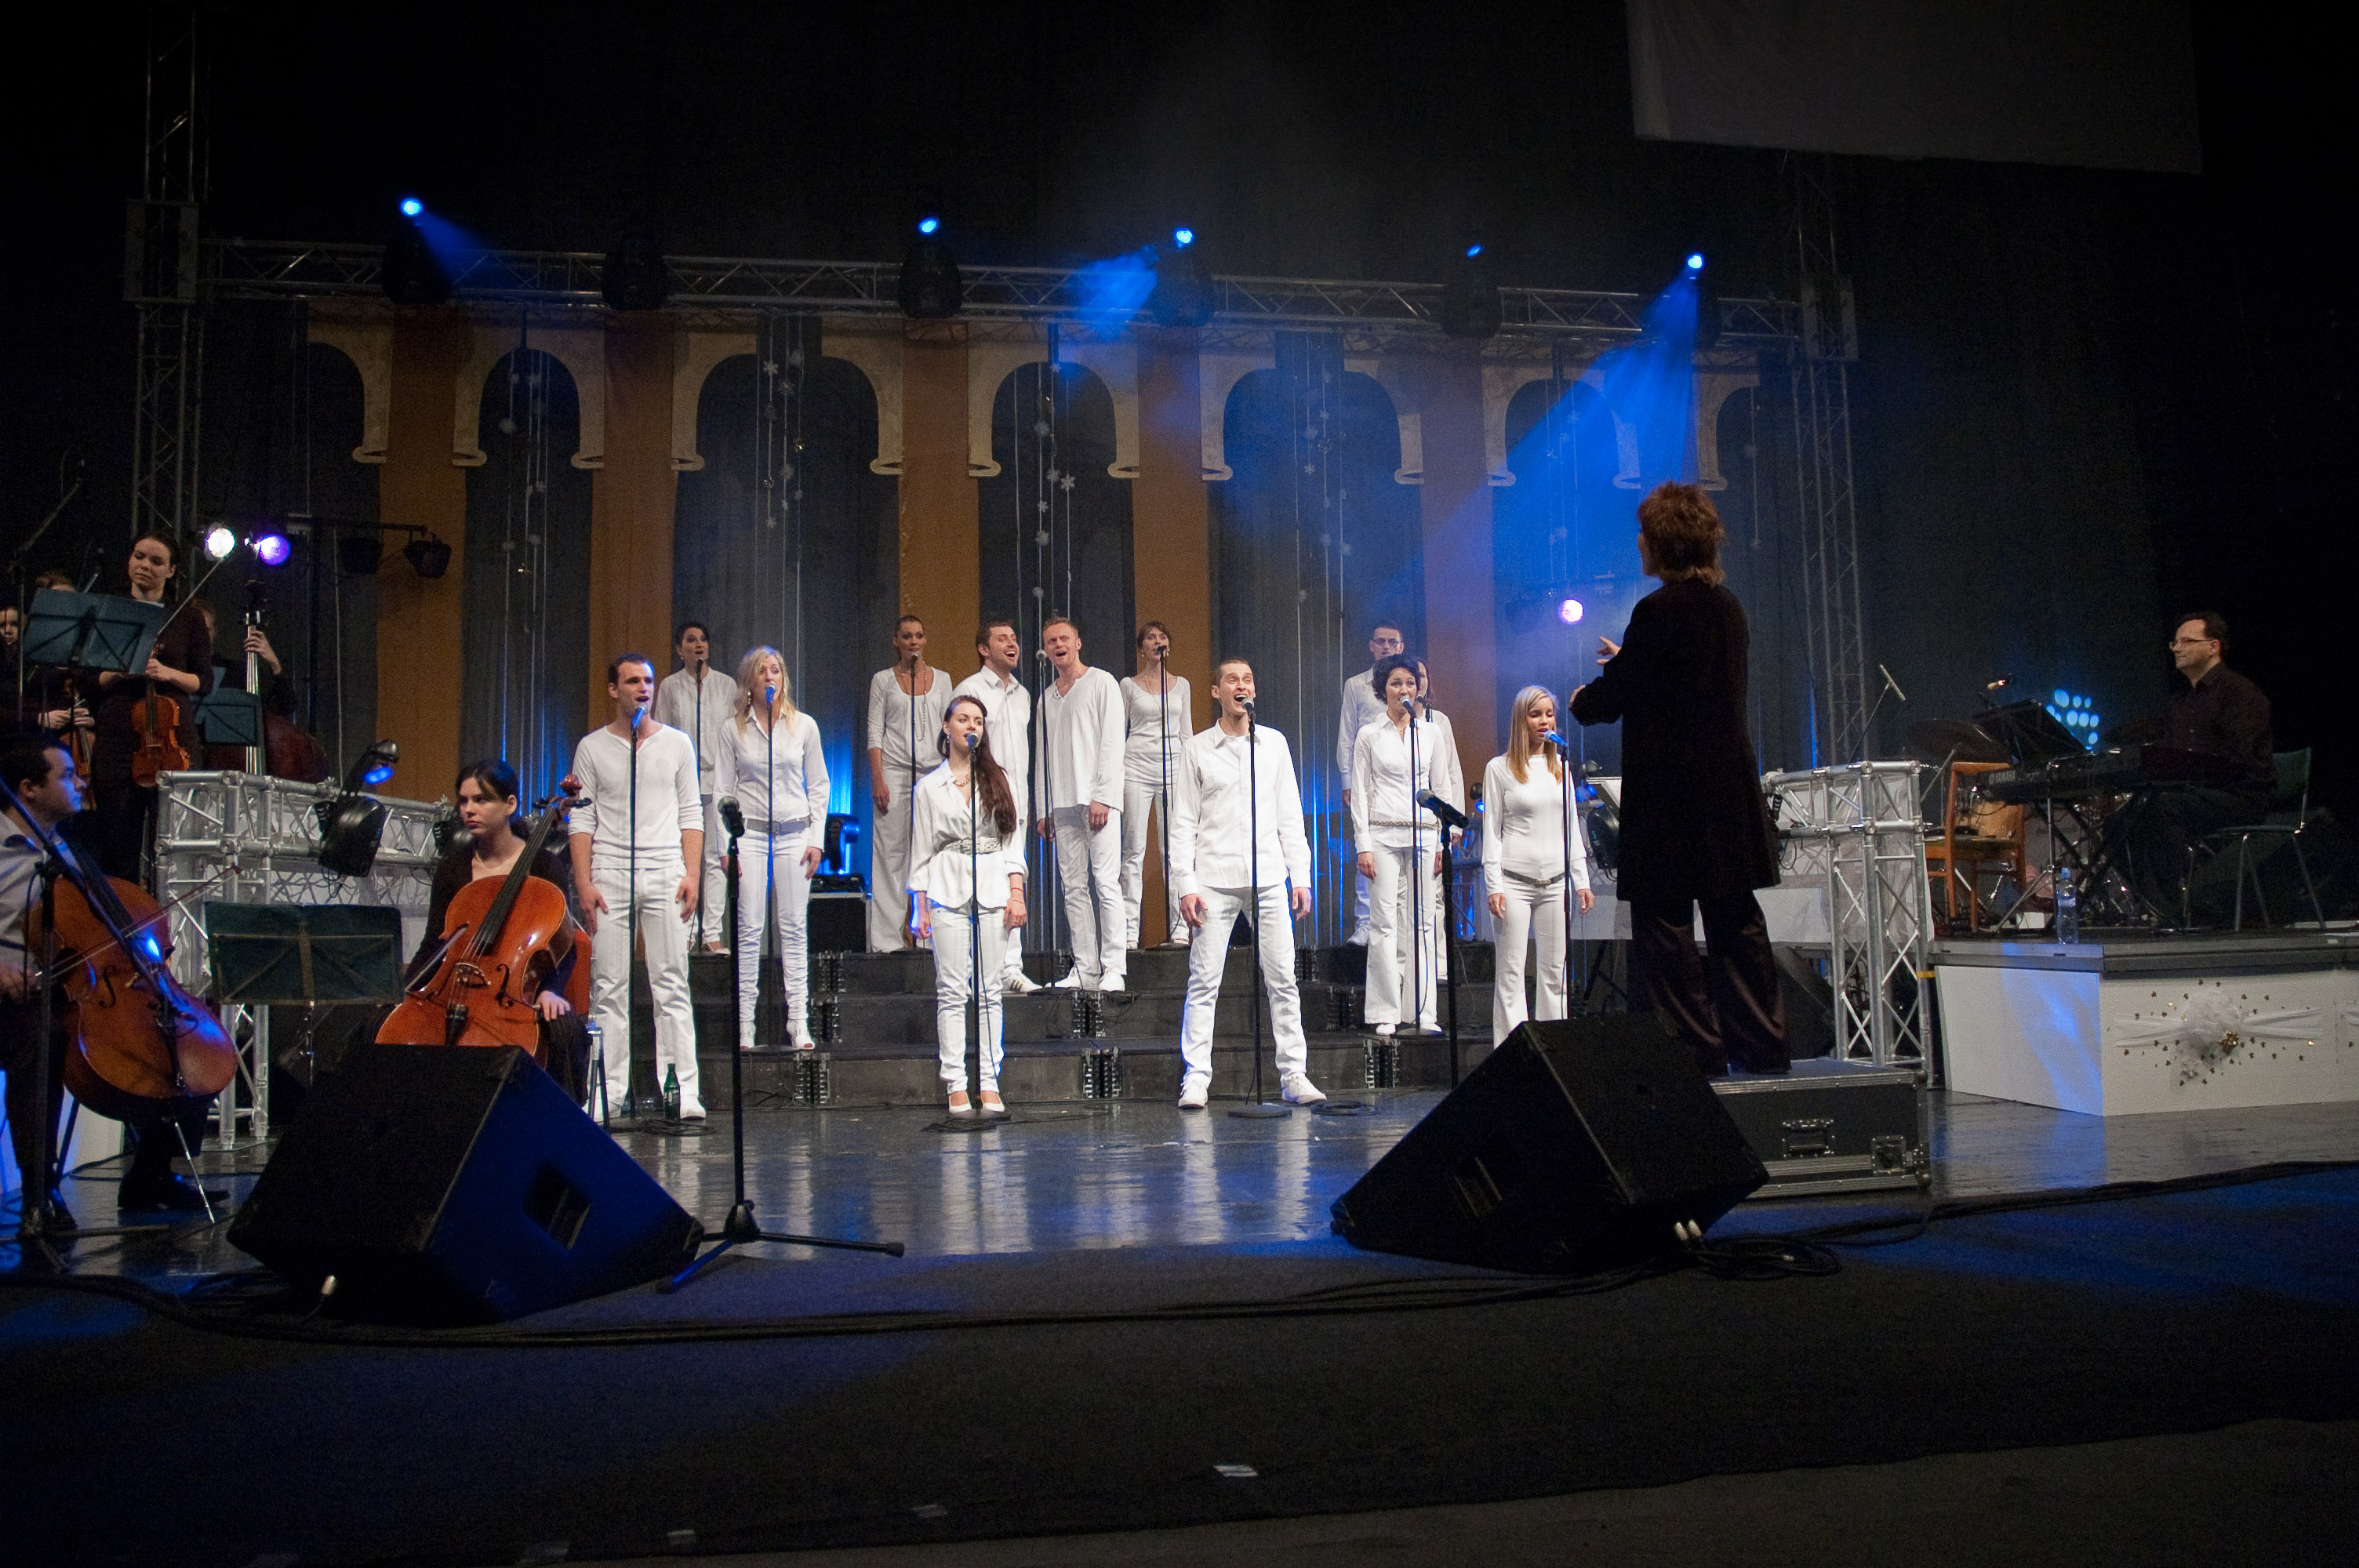 The Hope Gospel Singers and Band